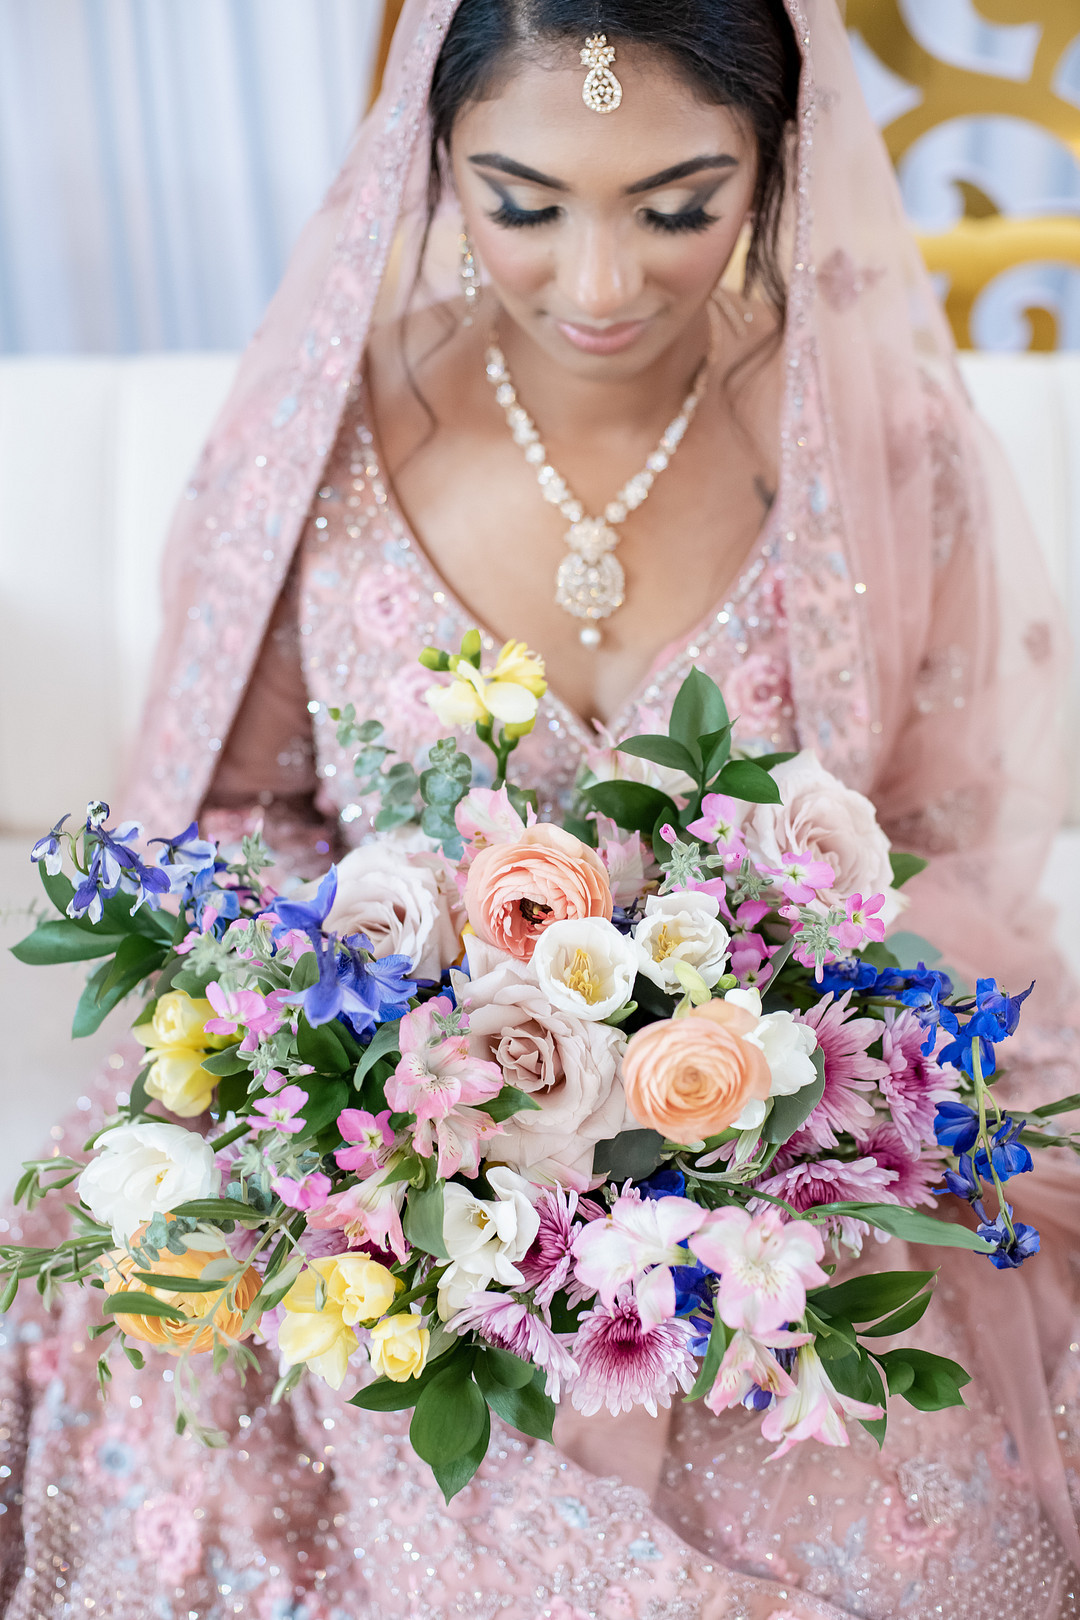 Wedding bouquet from Multicultural romance-styled shoot in Caldwell New Jersey by Adriannie of Flawless Events by Adriannie